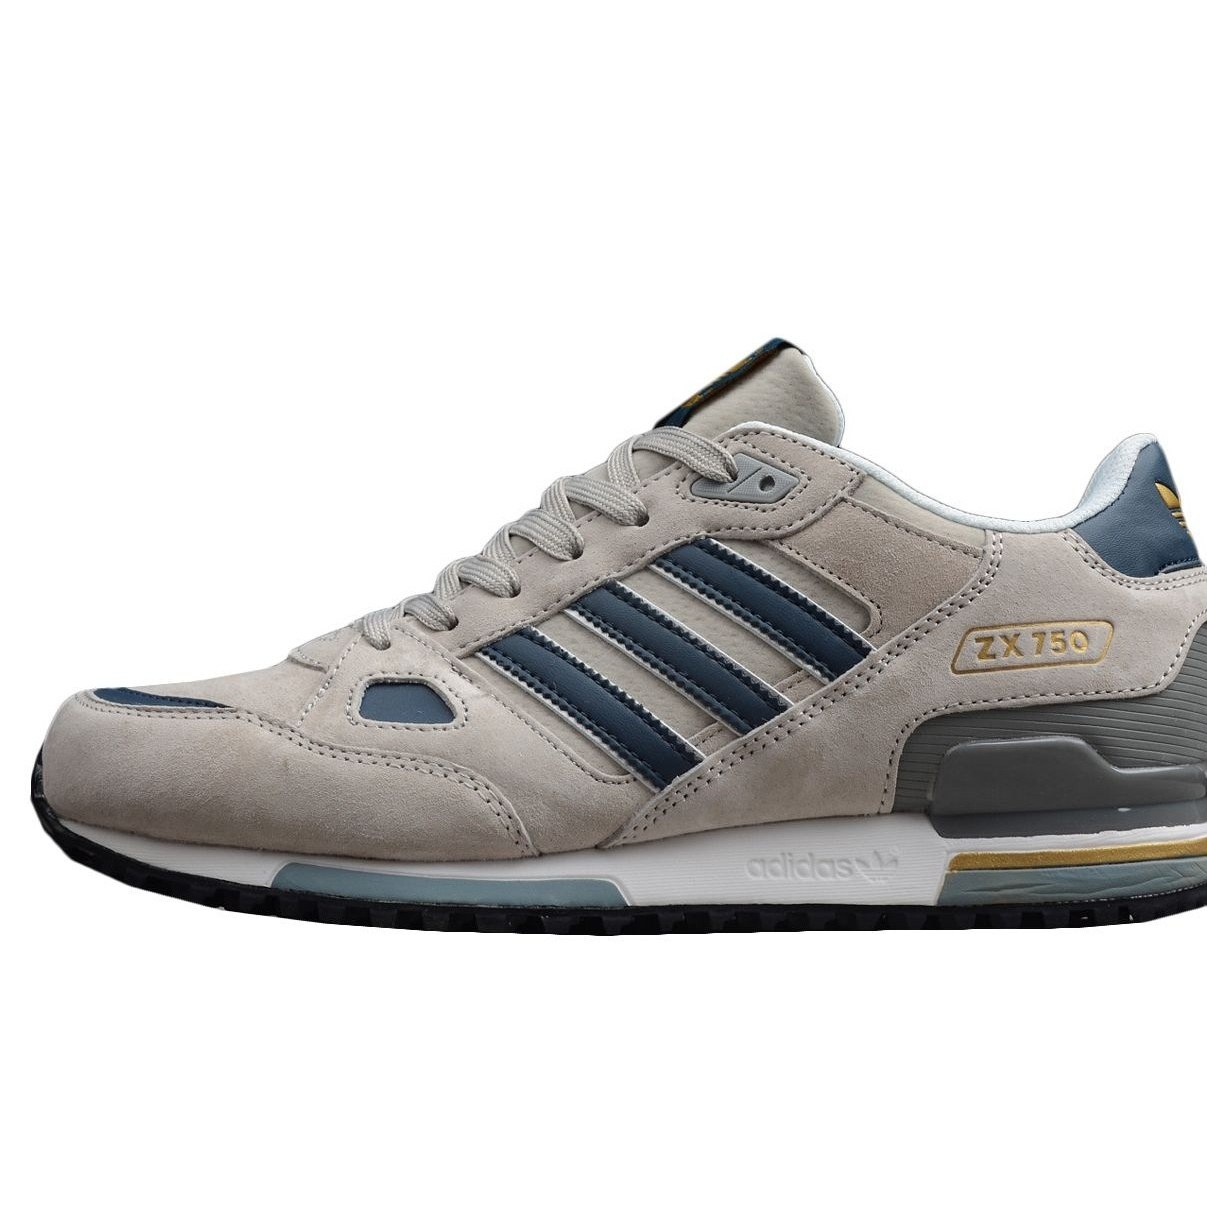 zx750 leather (suede/nylon)